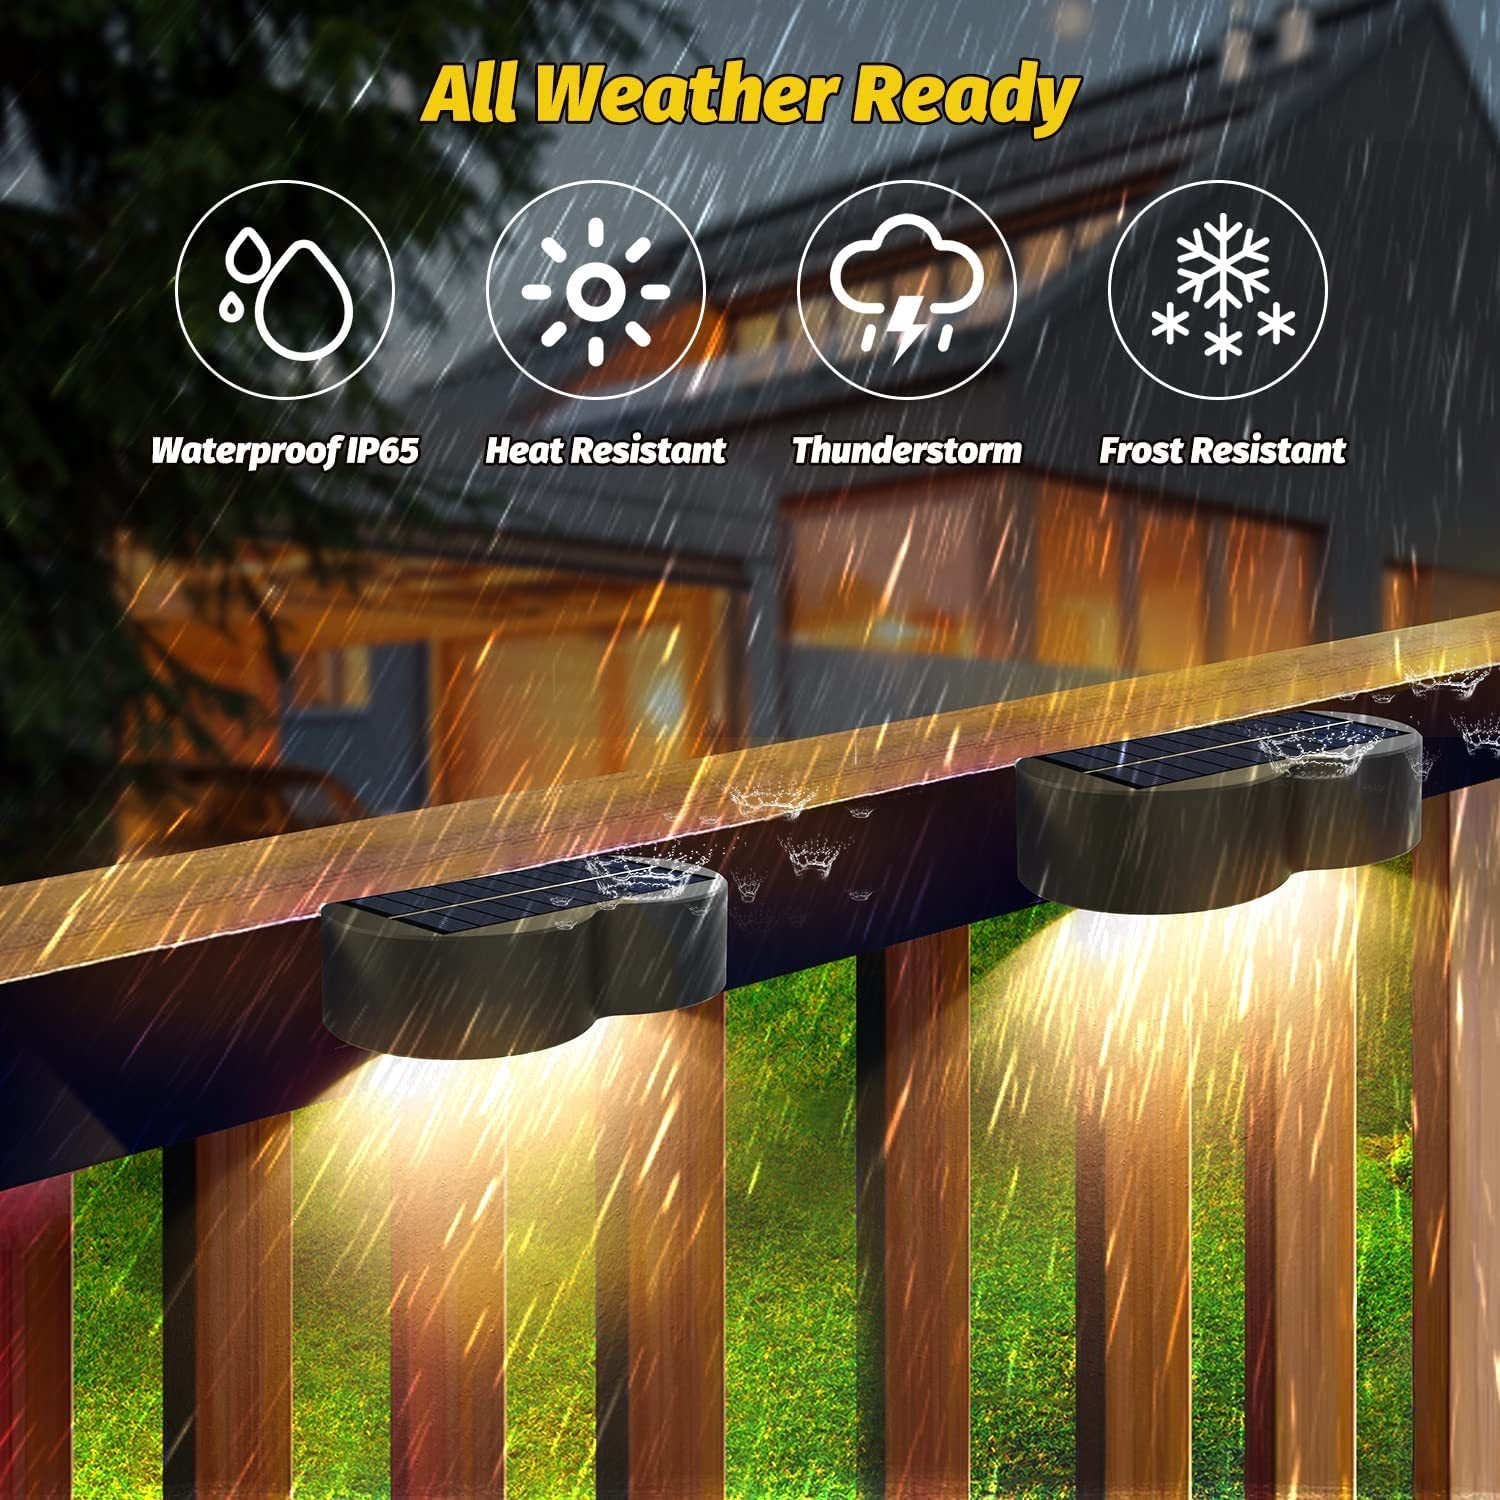 Solar Fence Lights  Outdoor Wall Lights Waterproof IP65, Warm White & RGB 8 Specific Fixed Colors for Fence Wall Step Deck Patio